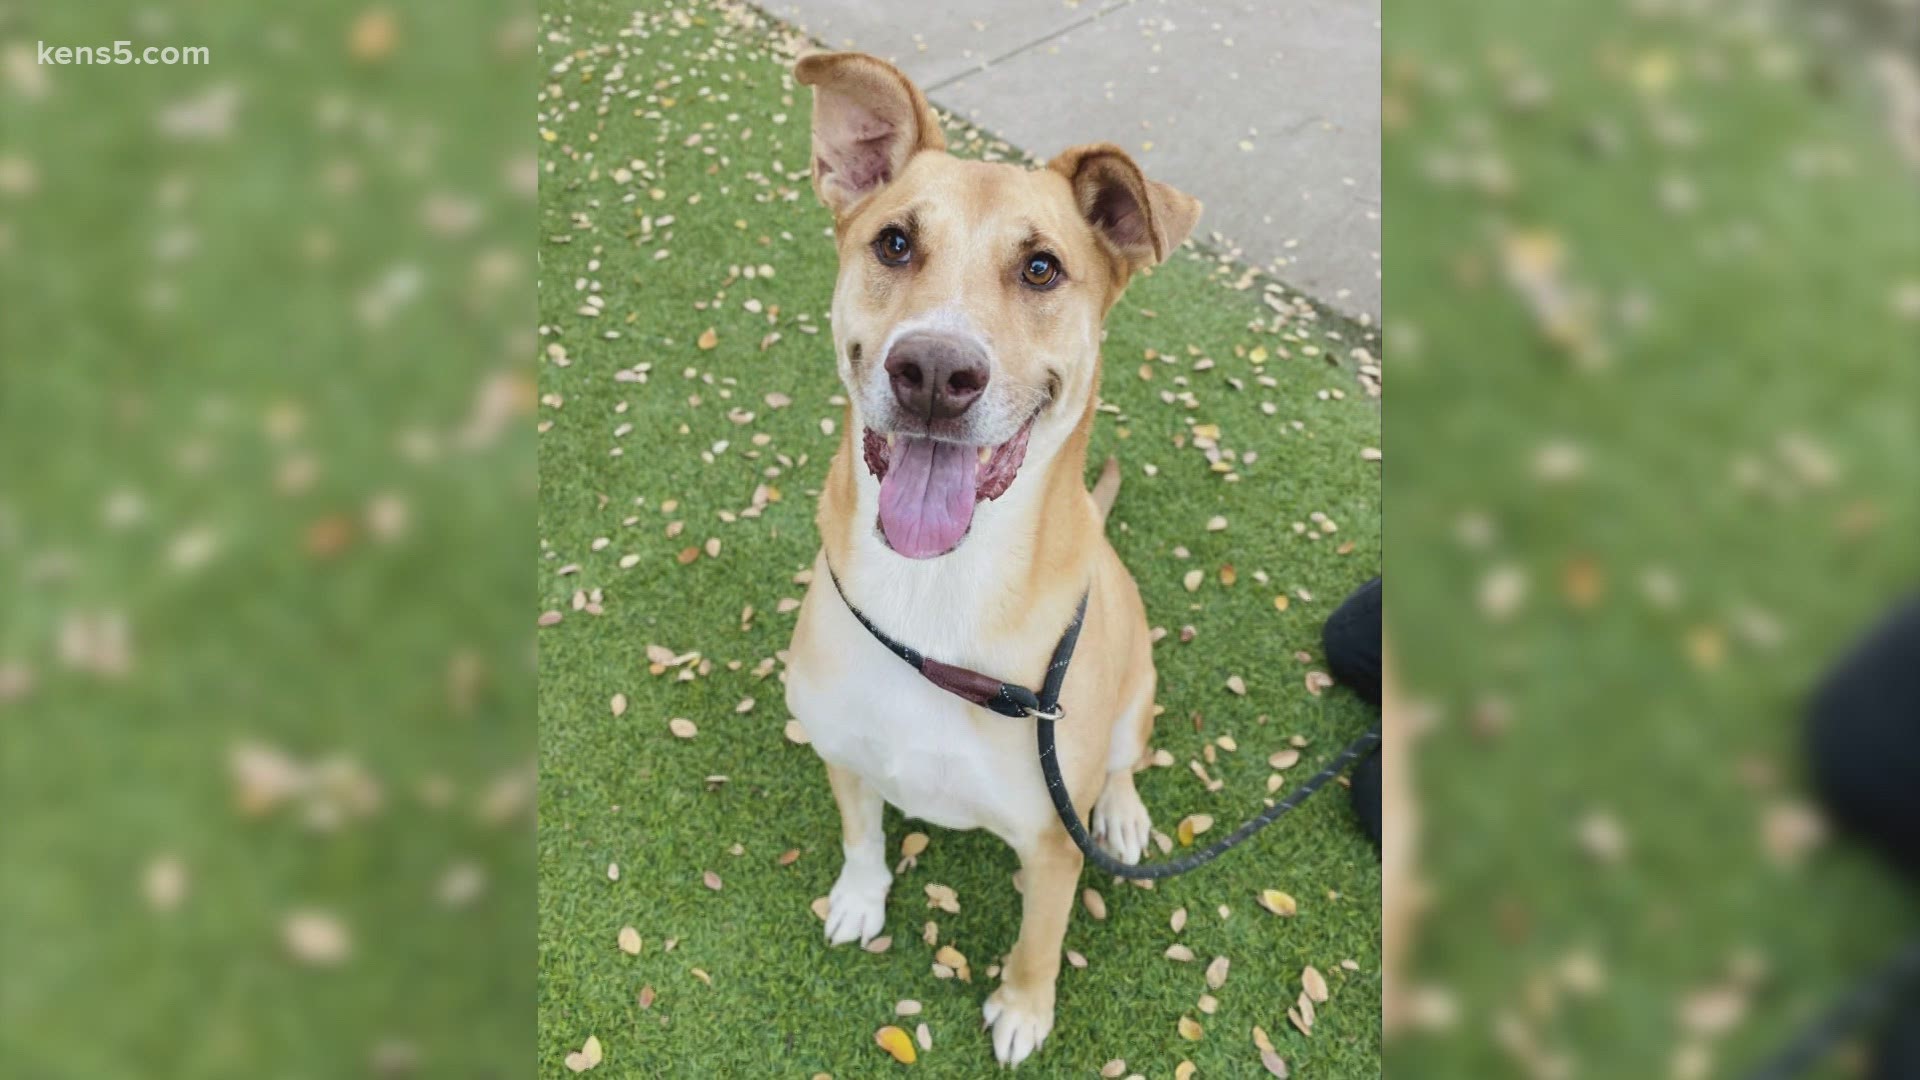 Sterling is a good walker and is still working on his manners, but loves to learn new tricks. The San Antonio Humane Society's adoption fees are reduced right now.